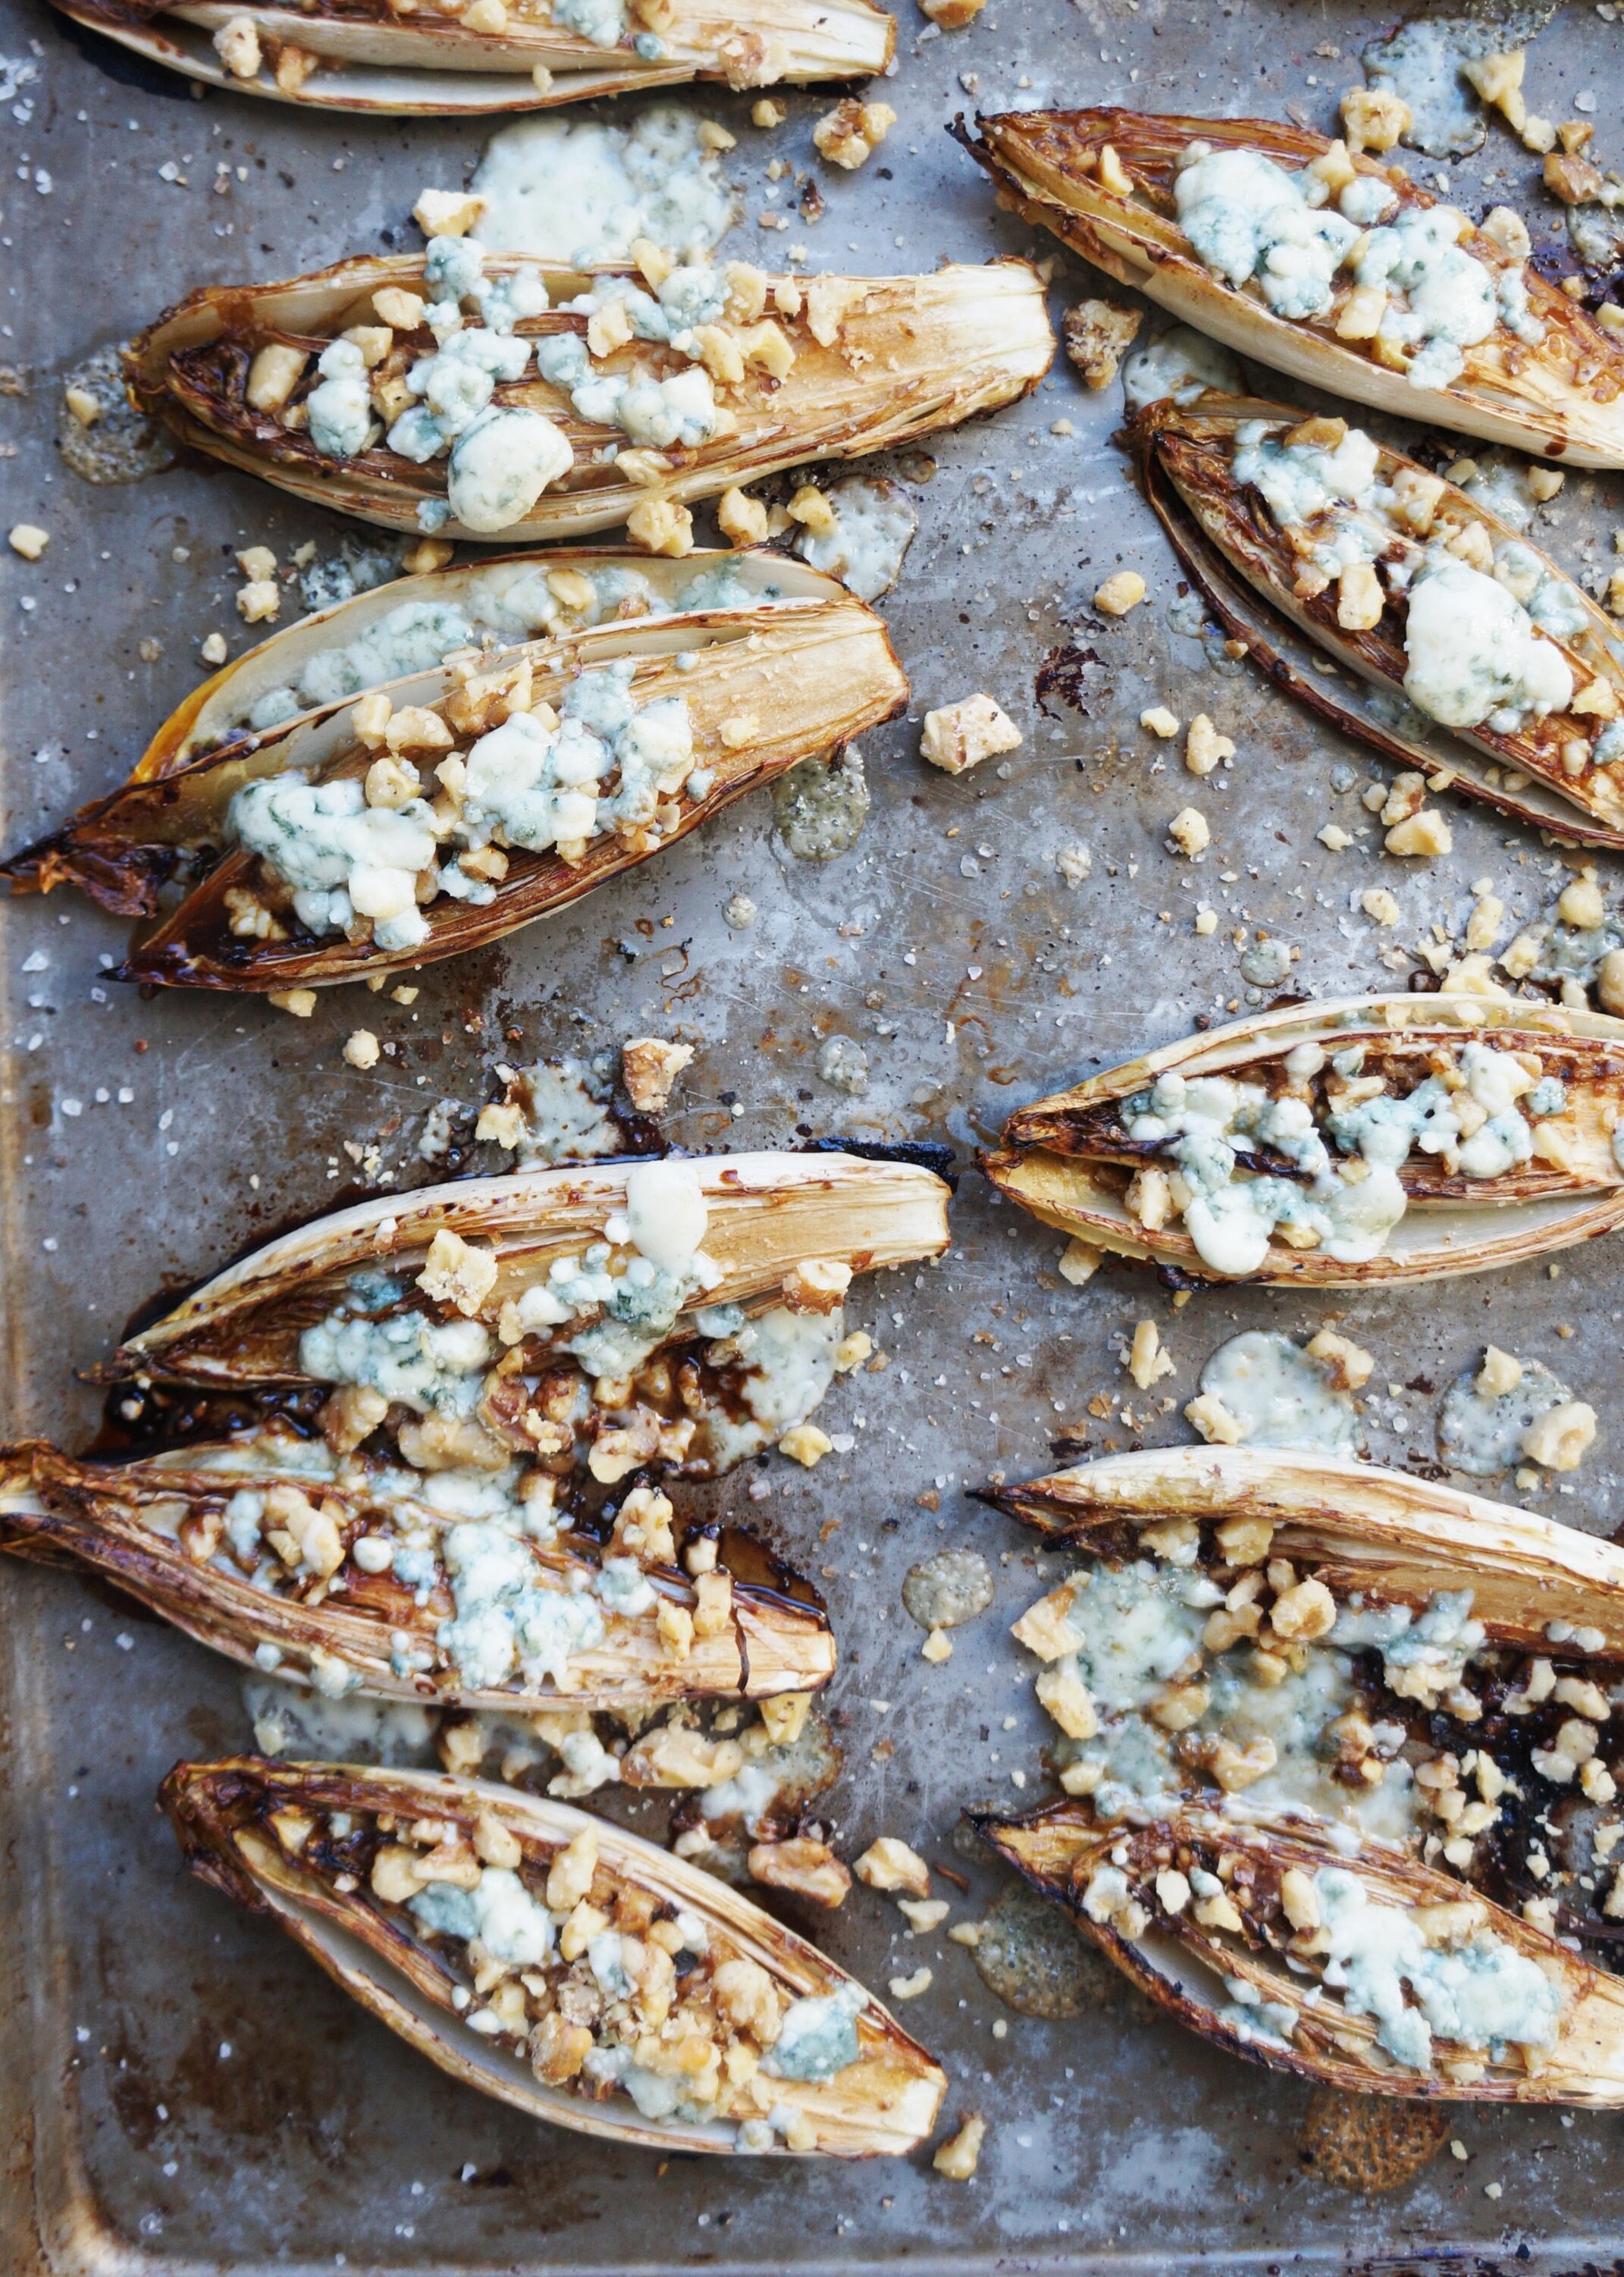 Roasted Belgian Eggplant with Blue Cheese, Walnuts and Balsamic Glaze